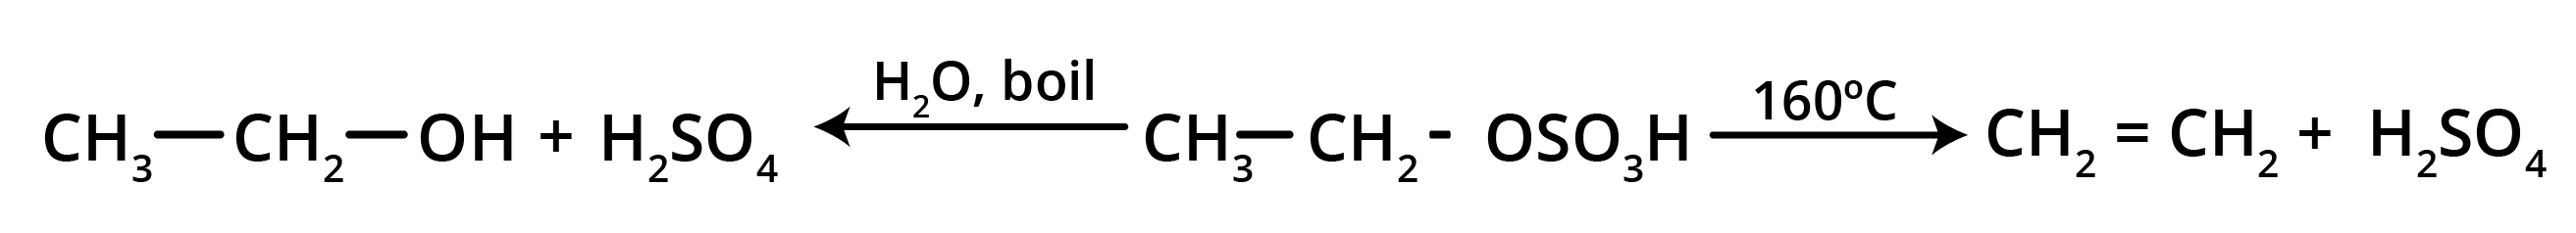 Formation of Alcohol from Alkyl Hydrogen Sulphates